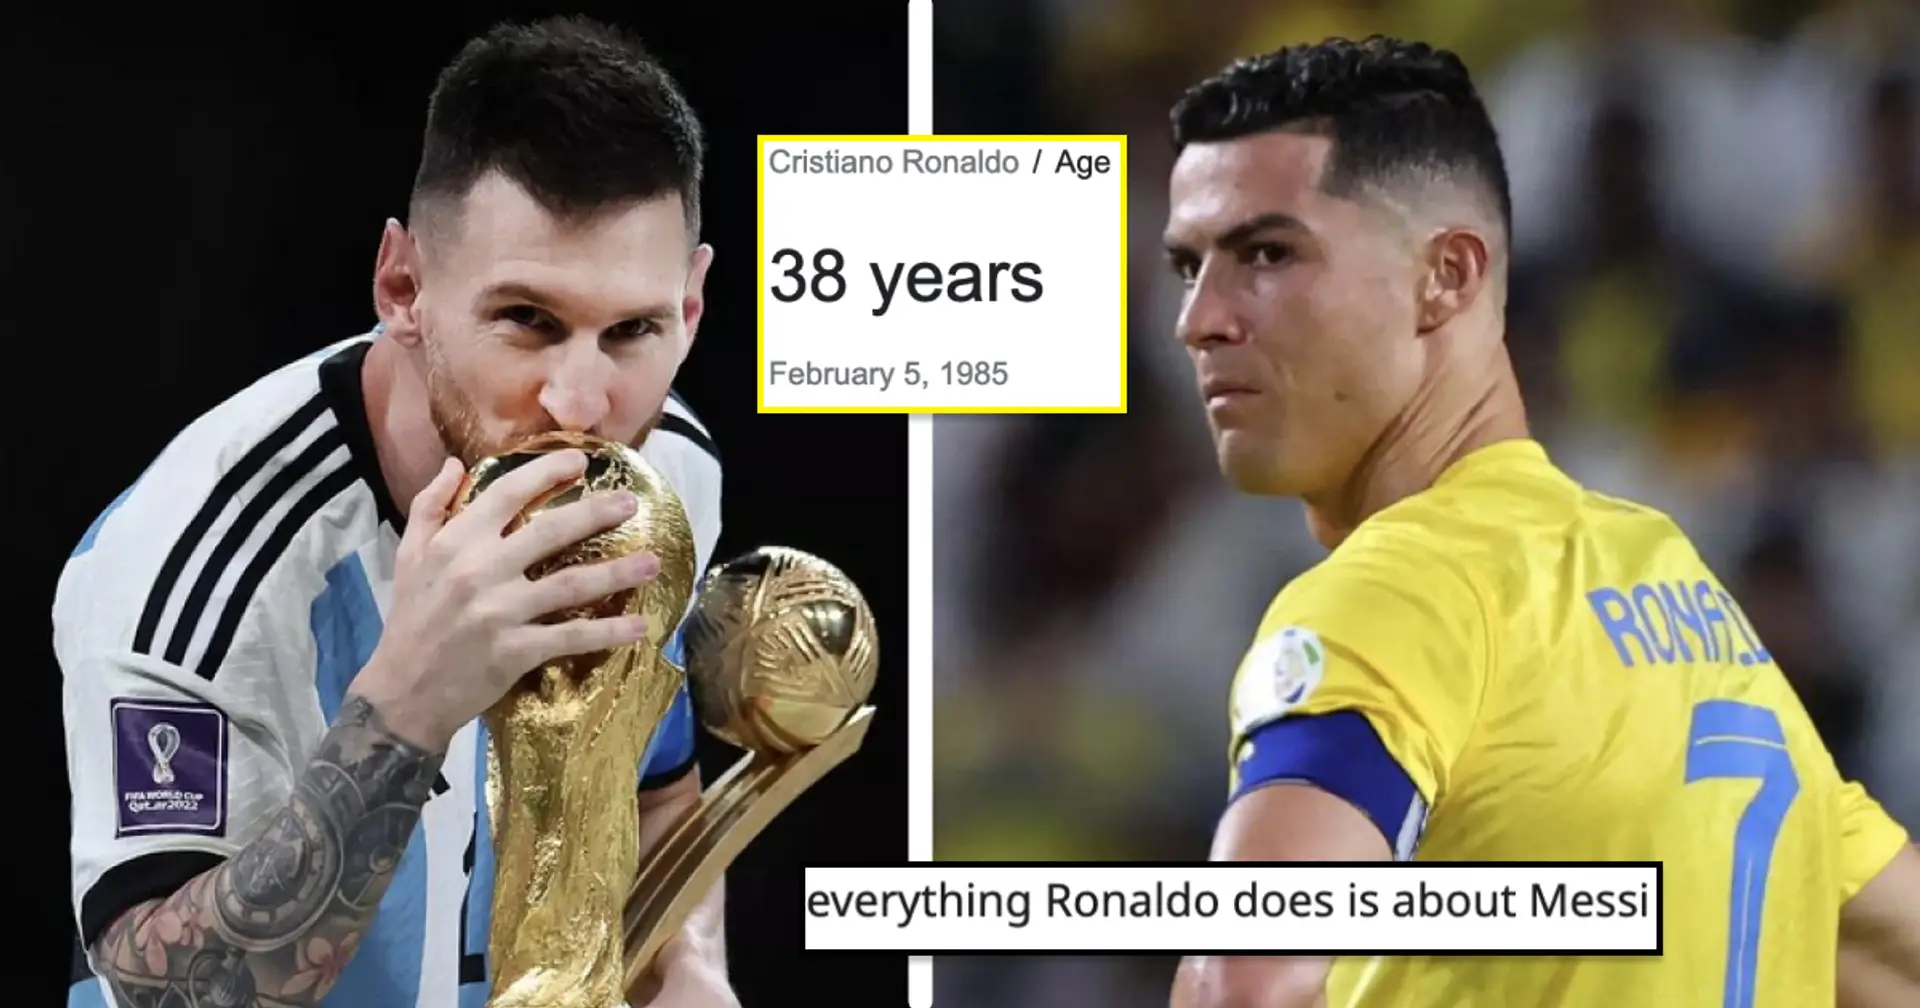 'Man just saw Messi win it': Fans react as Ronaldo aims to play 2026 World Cup as 41-year-old